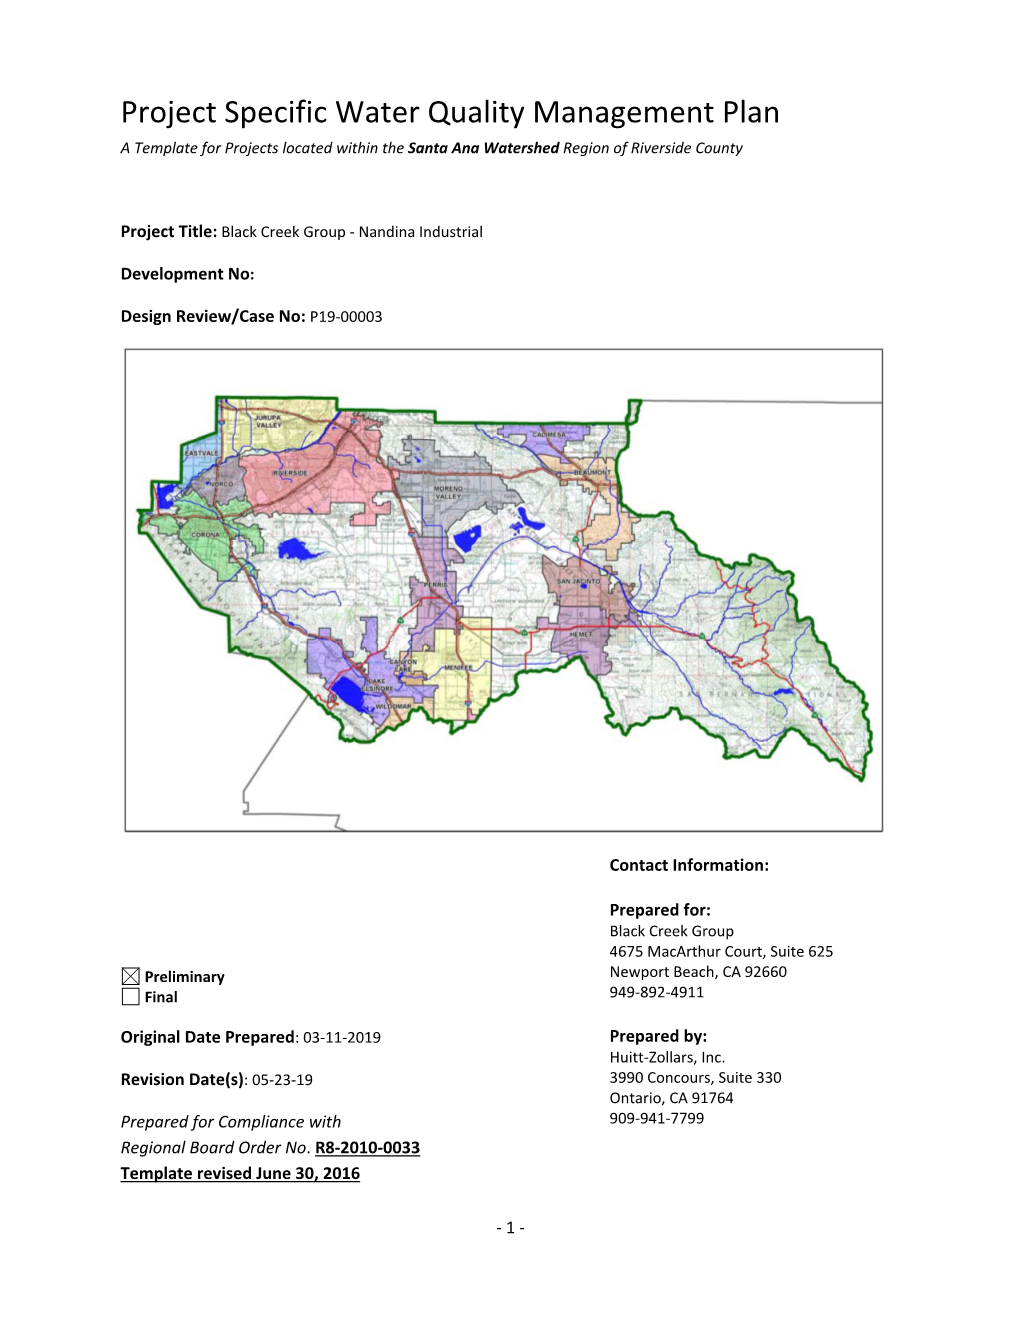 Project Specific Water Quality Management Plan a Template for Projects Located Within the Santa Ana Watershed Region of Riverside County